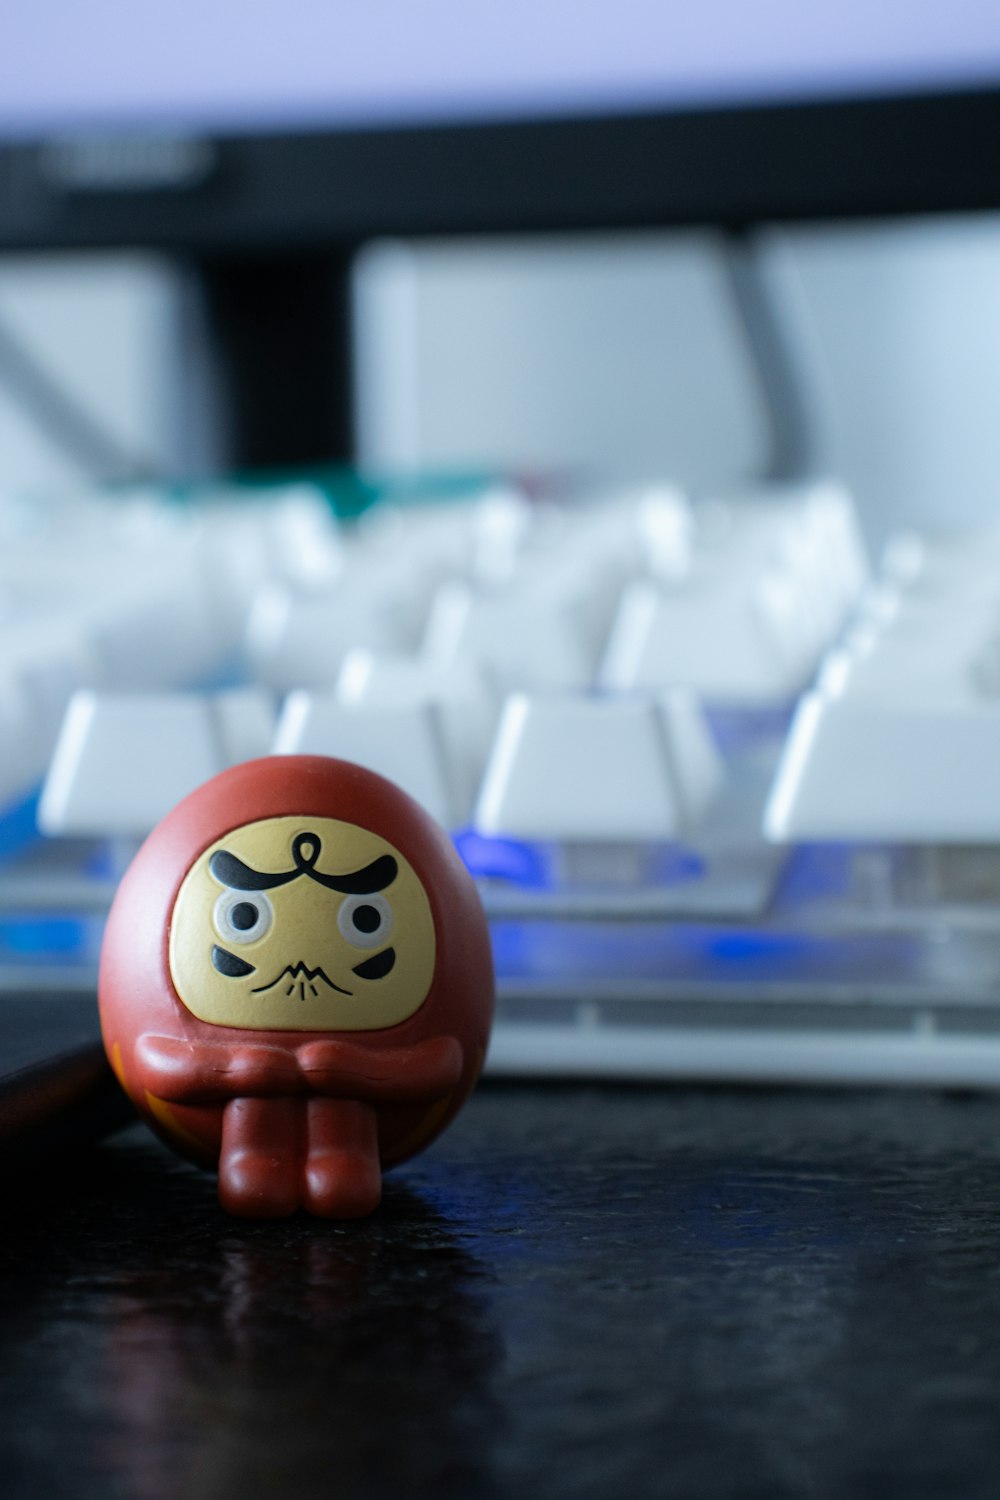 a small toy sitting in front of a computer keyboard